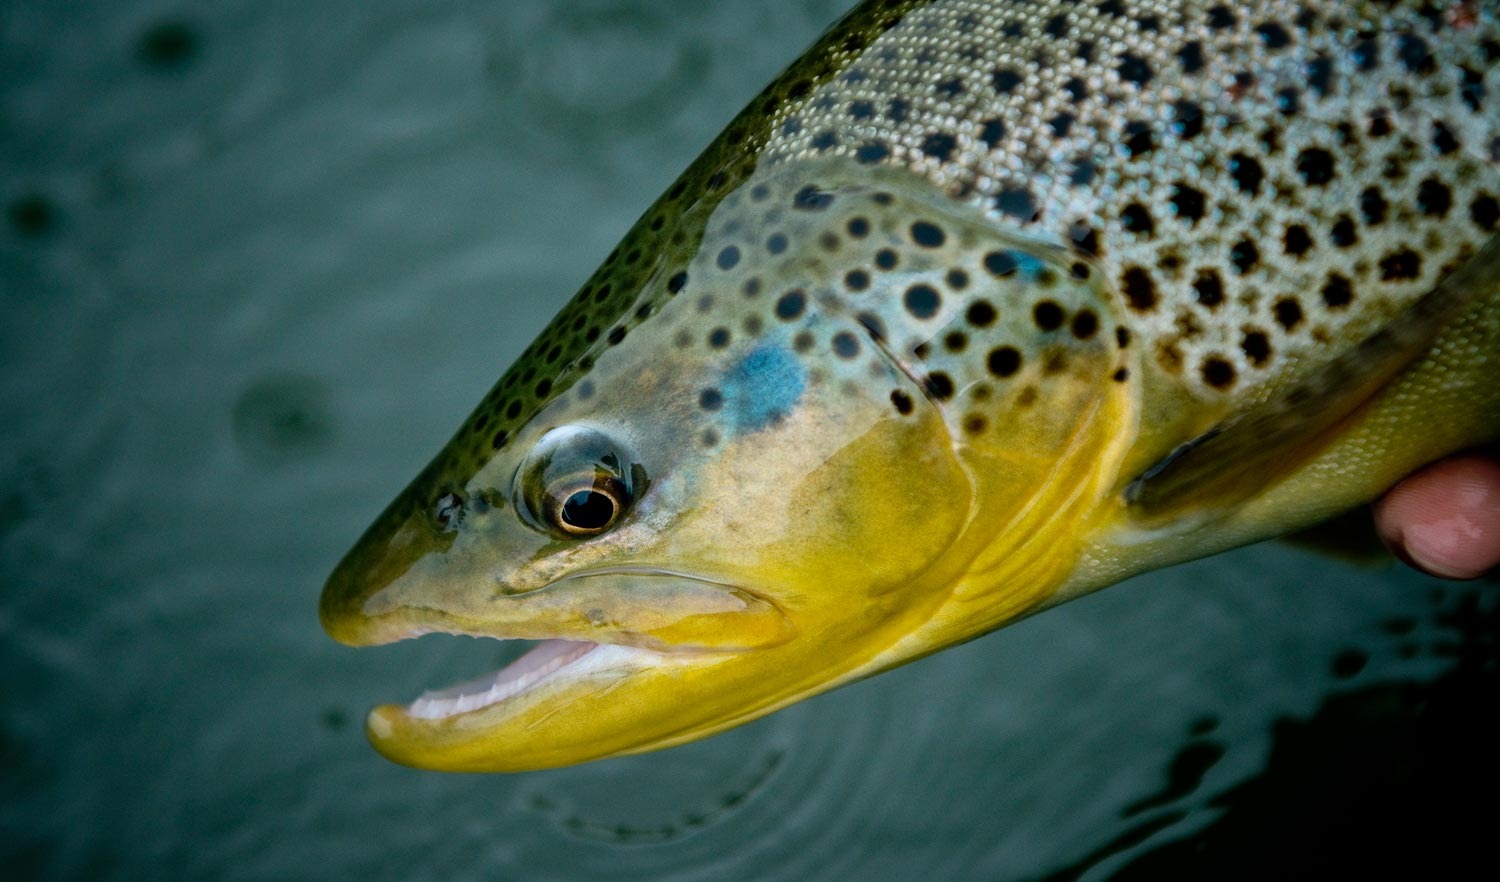 https://www.ginkandgasoline.com/wp-content/uploads/2013/10/fly-fishing-shallow-water-trout.jpg